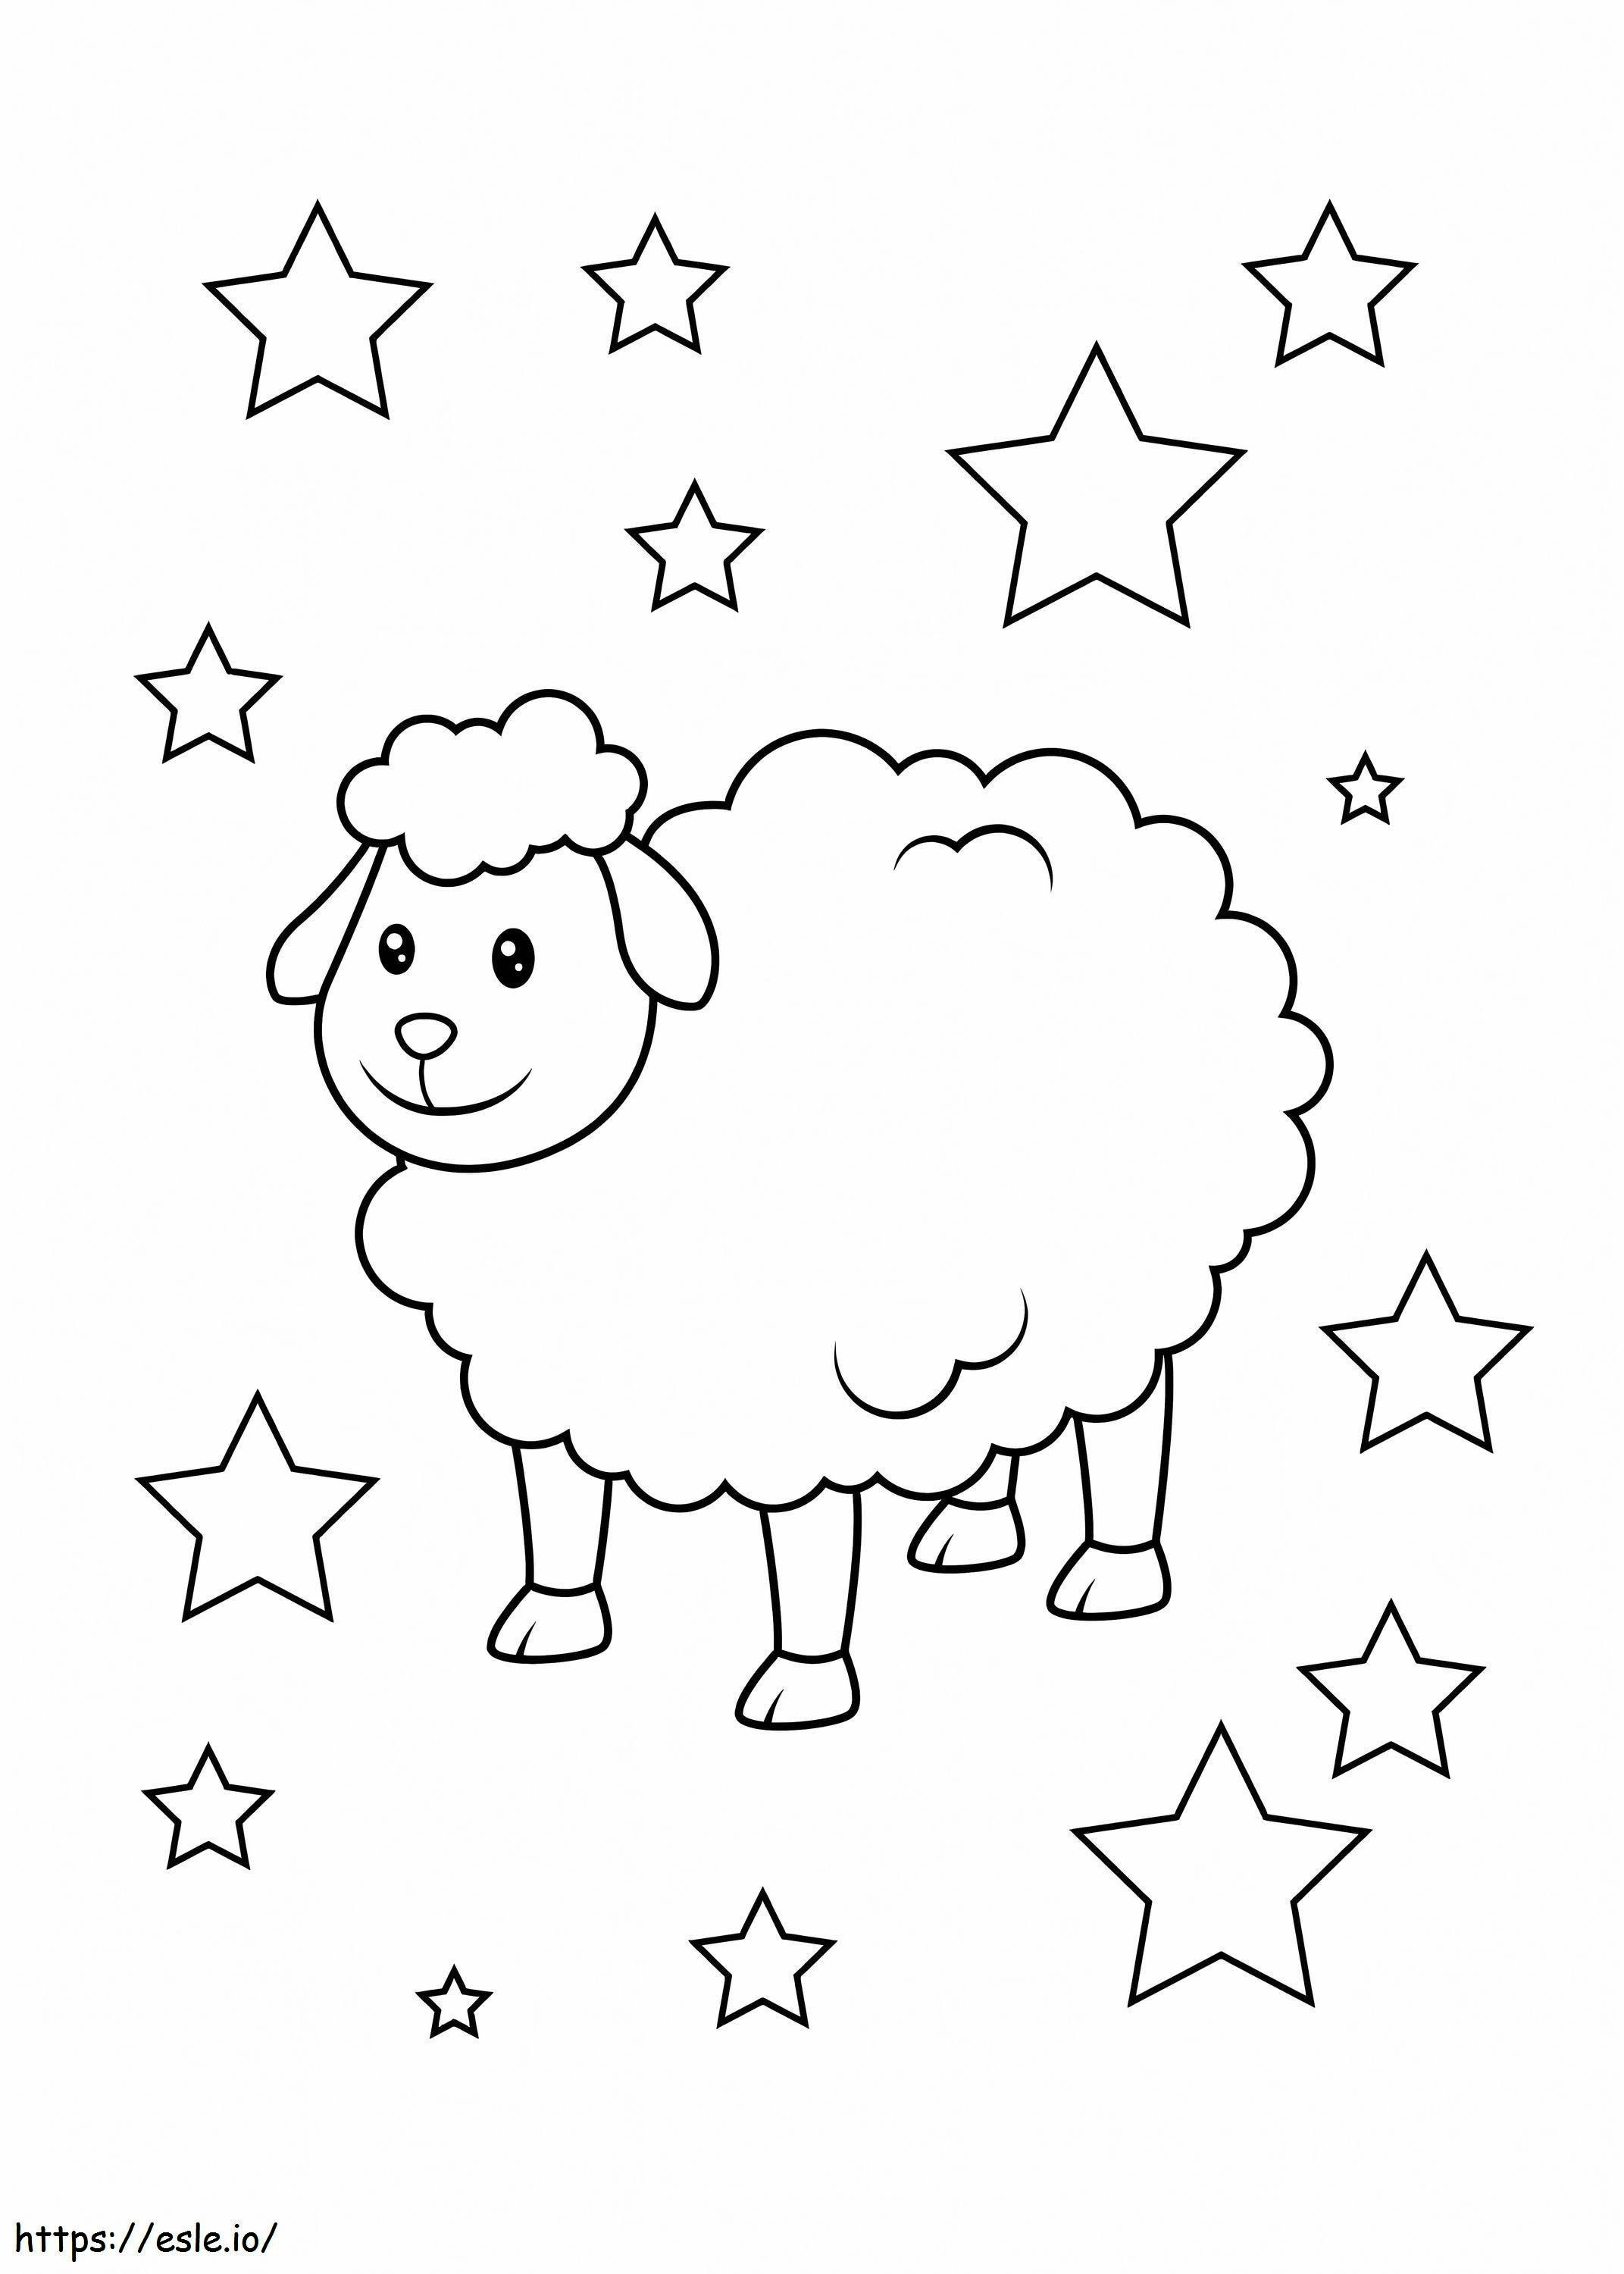 Sheep With Stars coloring page